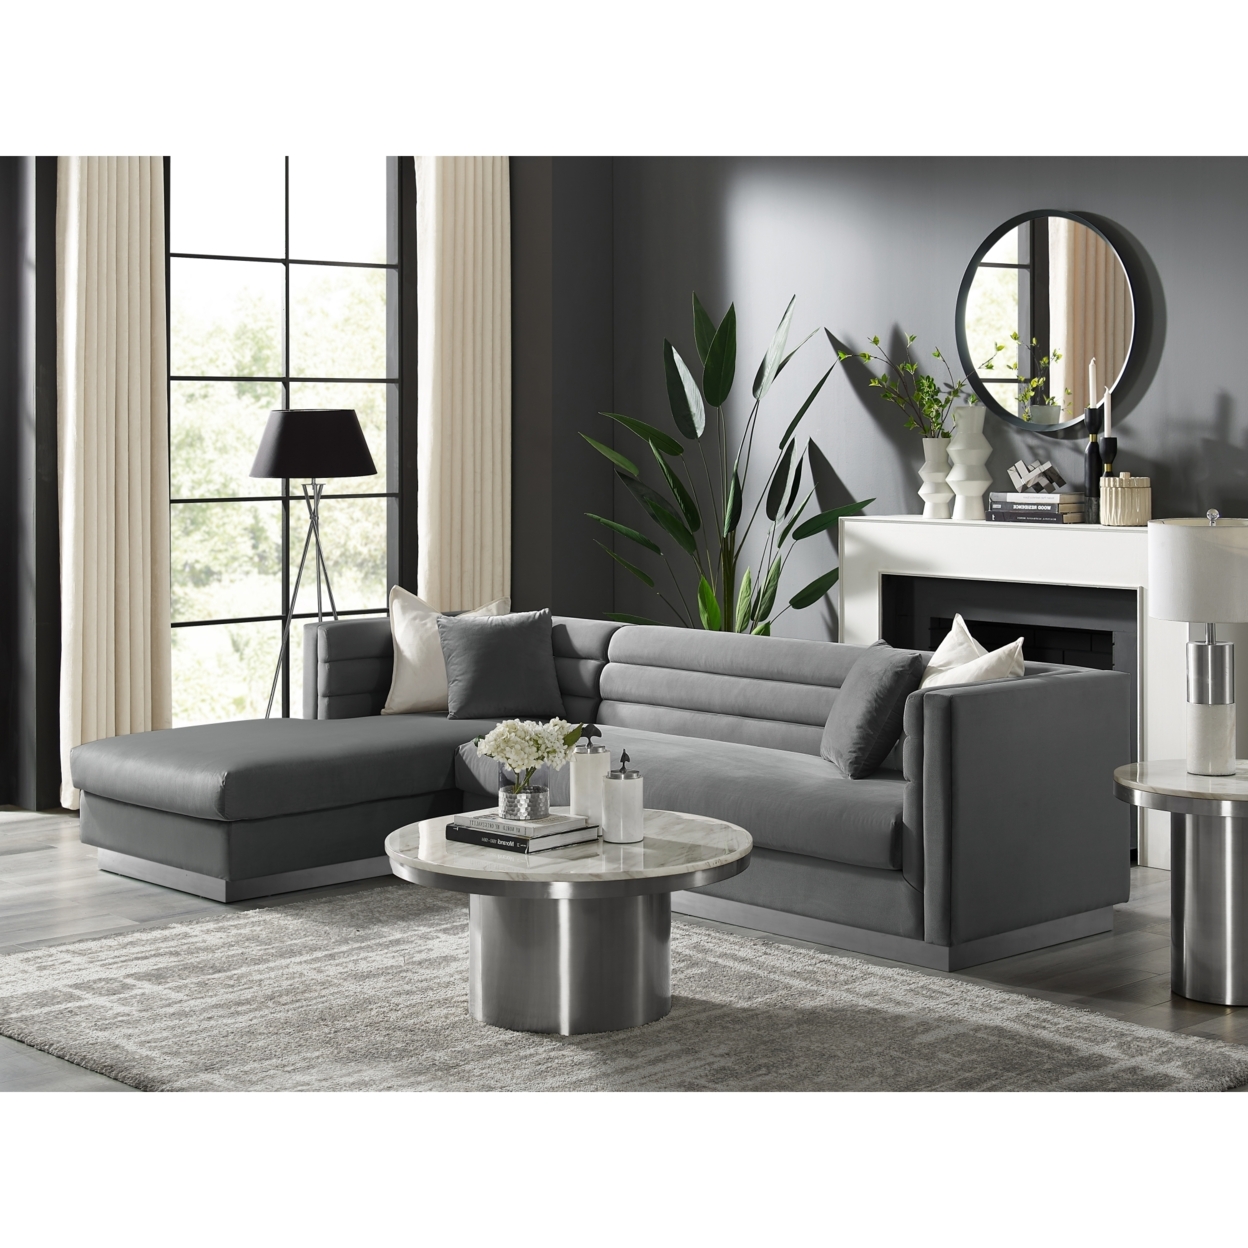 Aja Sofa-Upholstered-Sectional-Metal Base, Square Arms-Horizontal Channel Tufting - dark grey